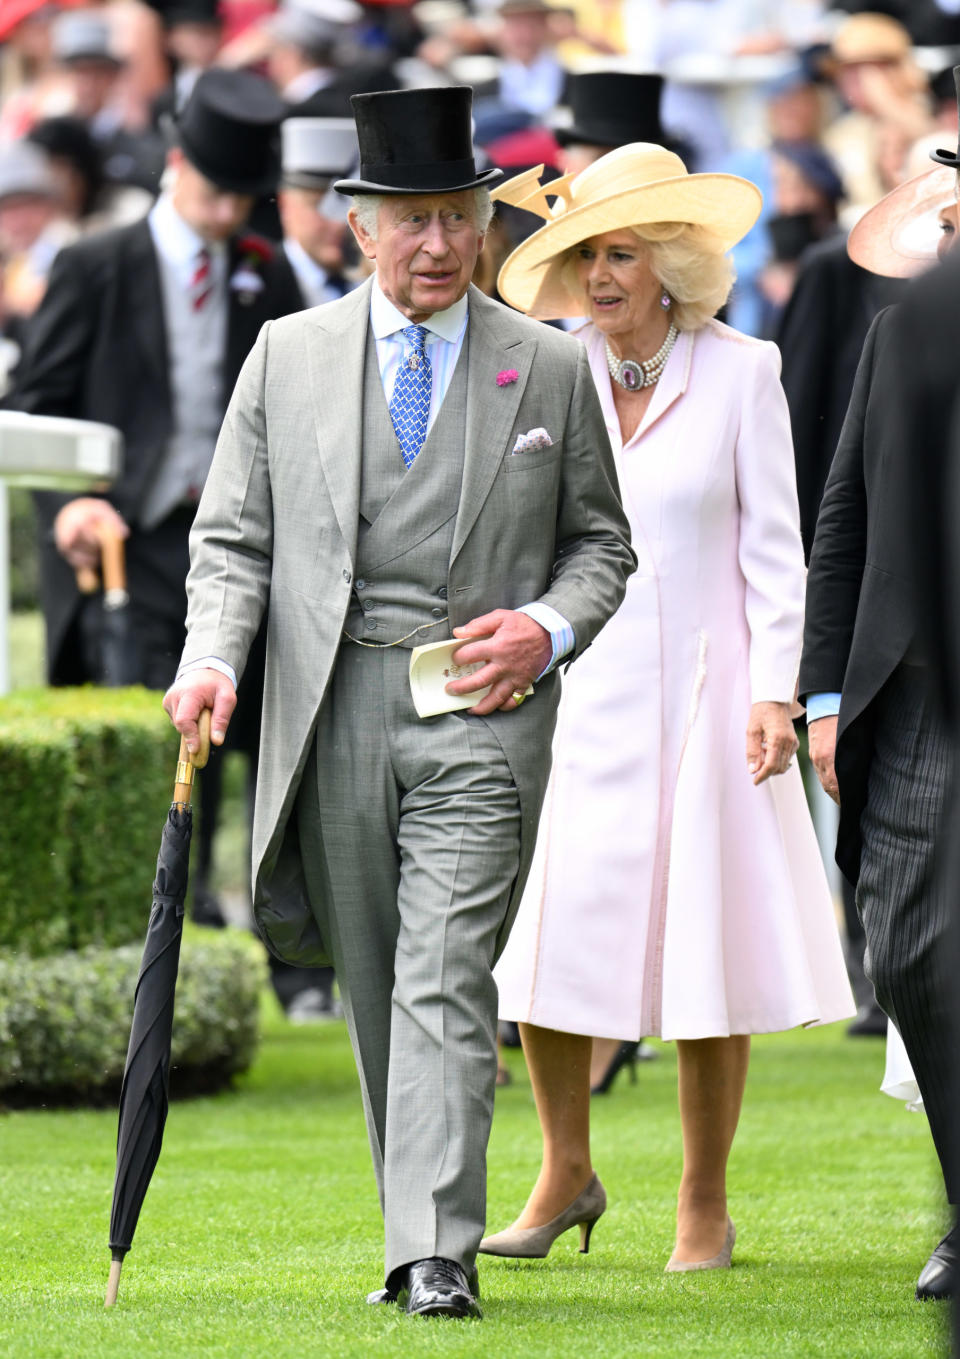 Queen Camilla and King Charles III attend day two of Royal Ascot 2023 at Ascot Racecourse on June 21, 2023 in Ascot, England. (Photo by Karwai Tang/WireImage)